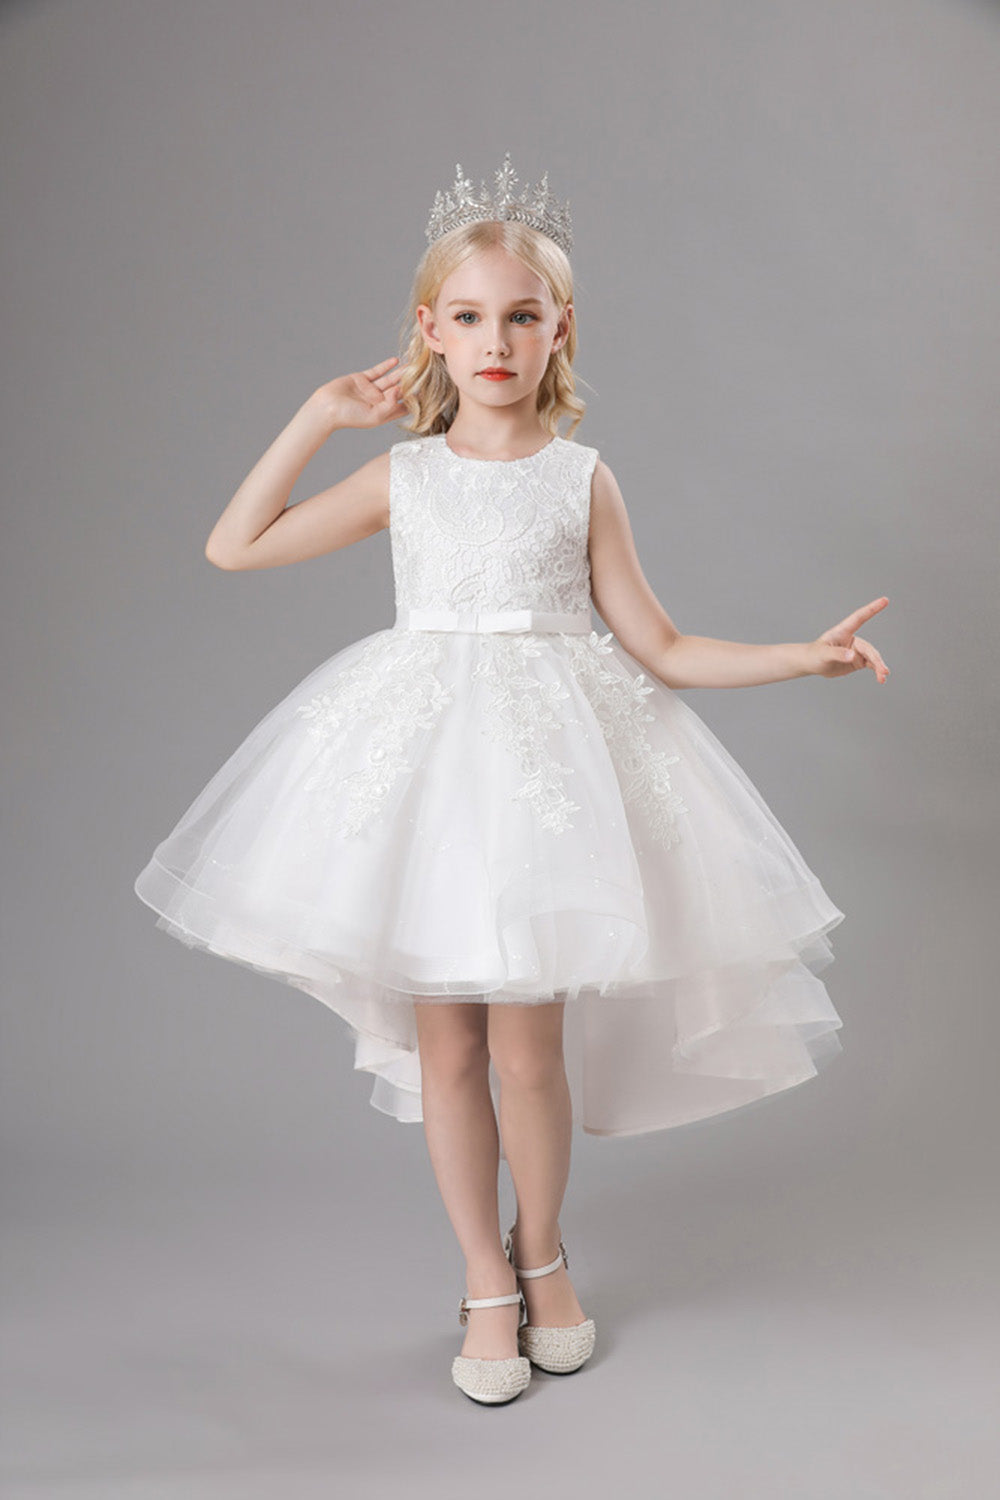 White Jewel Neck Bowknot Sleeveless Girls' Dress With Appliques